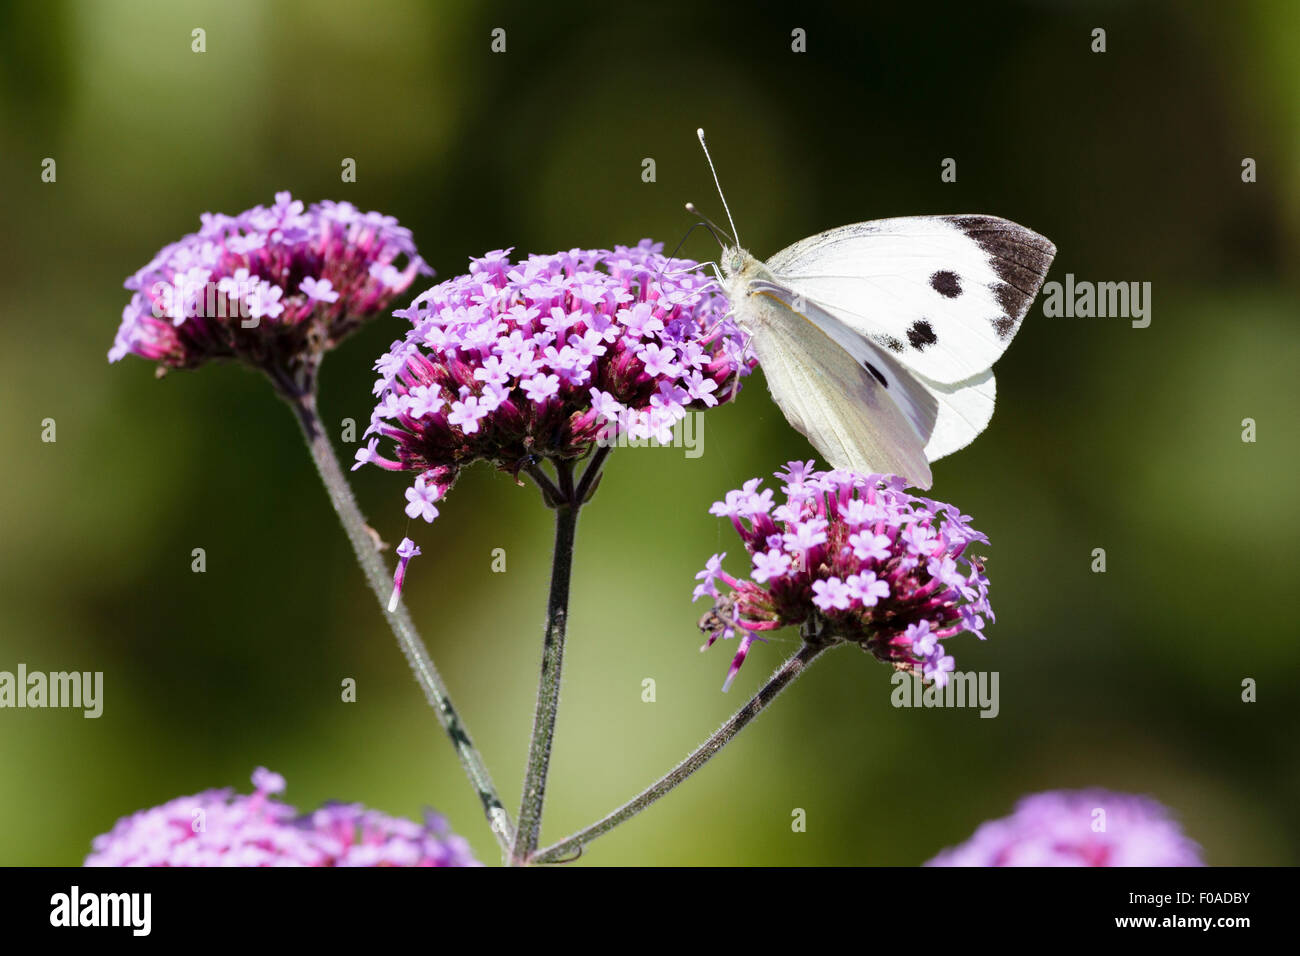 Large white or cabbage white butterfly (Pieris brassicae) on Verbena flower, East Sussex garden, UK Stock Photo